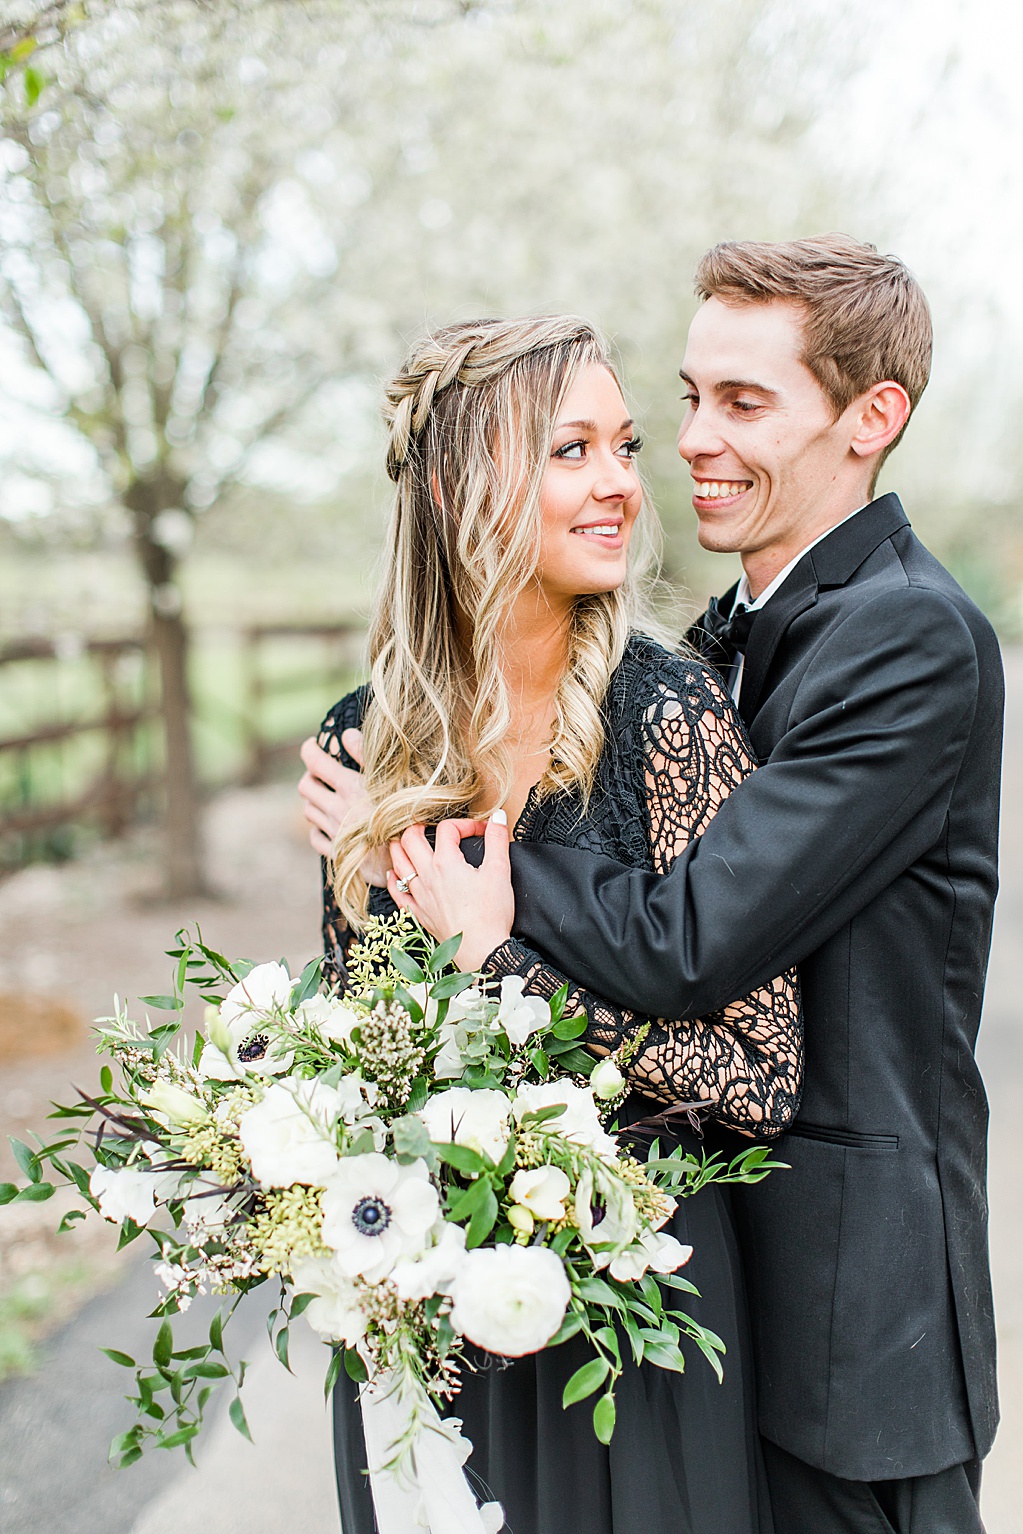 King River Ranch Wedding Venue in Johnson City Engagement Photos in the white Pear blossoms by Allison Jeffers Wedding Photography 0036